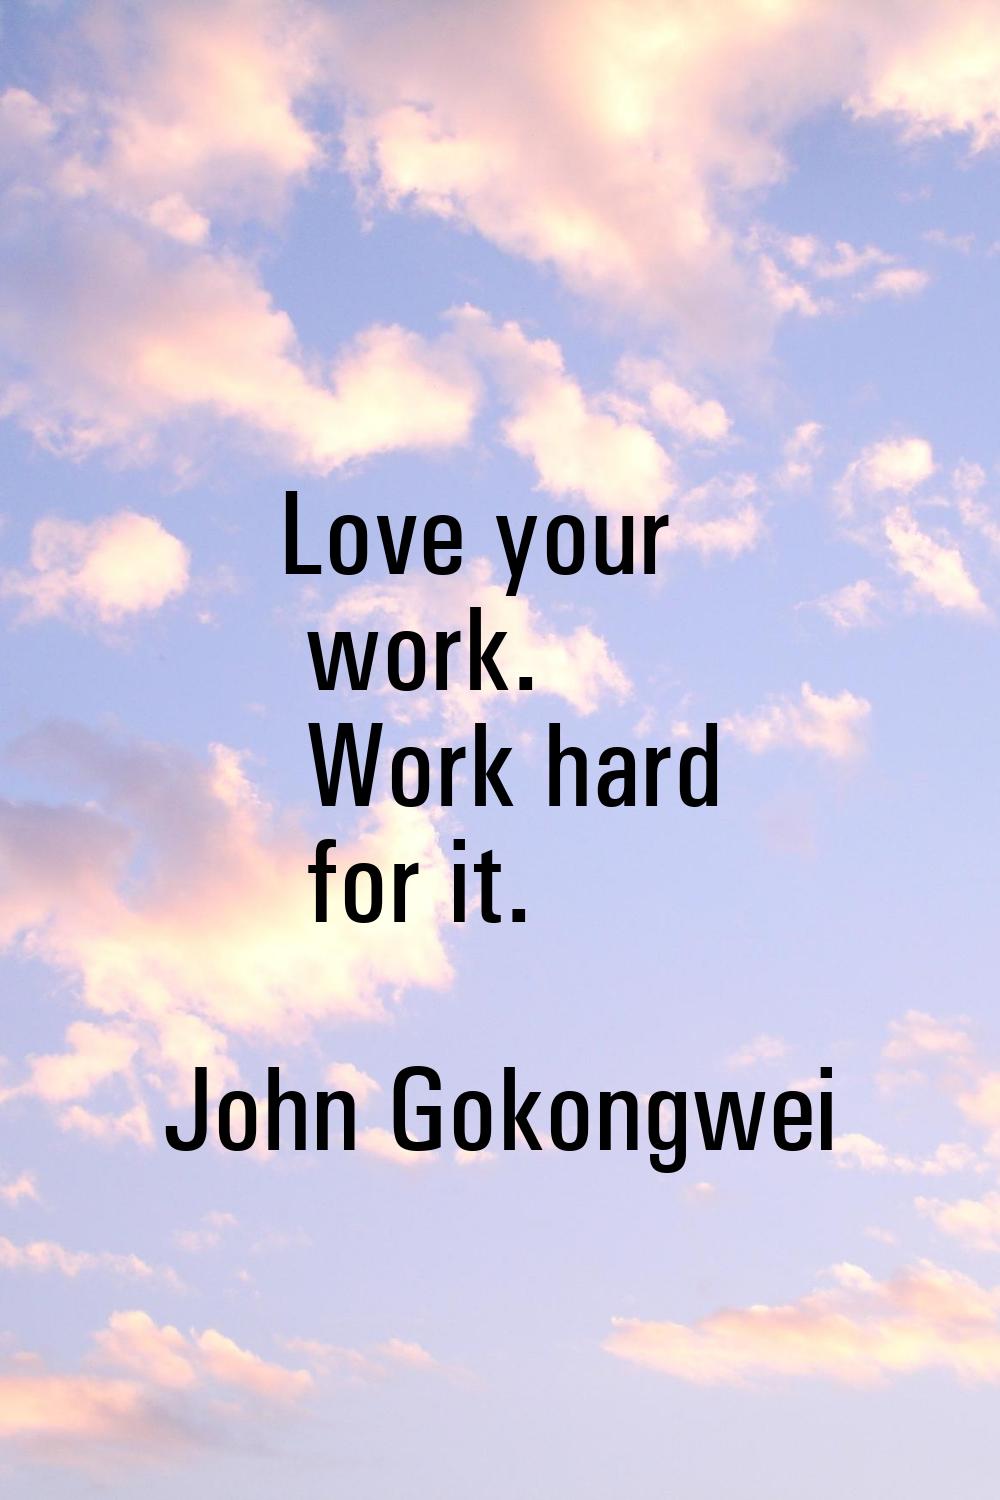 Love your work. Work hard for it.